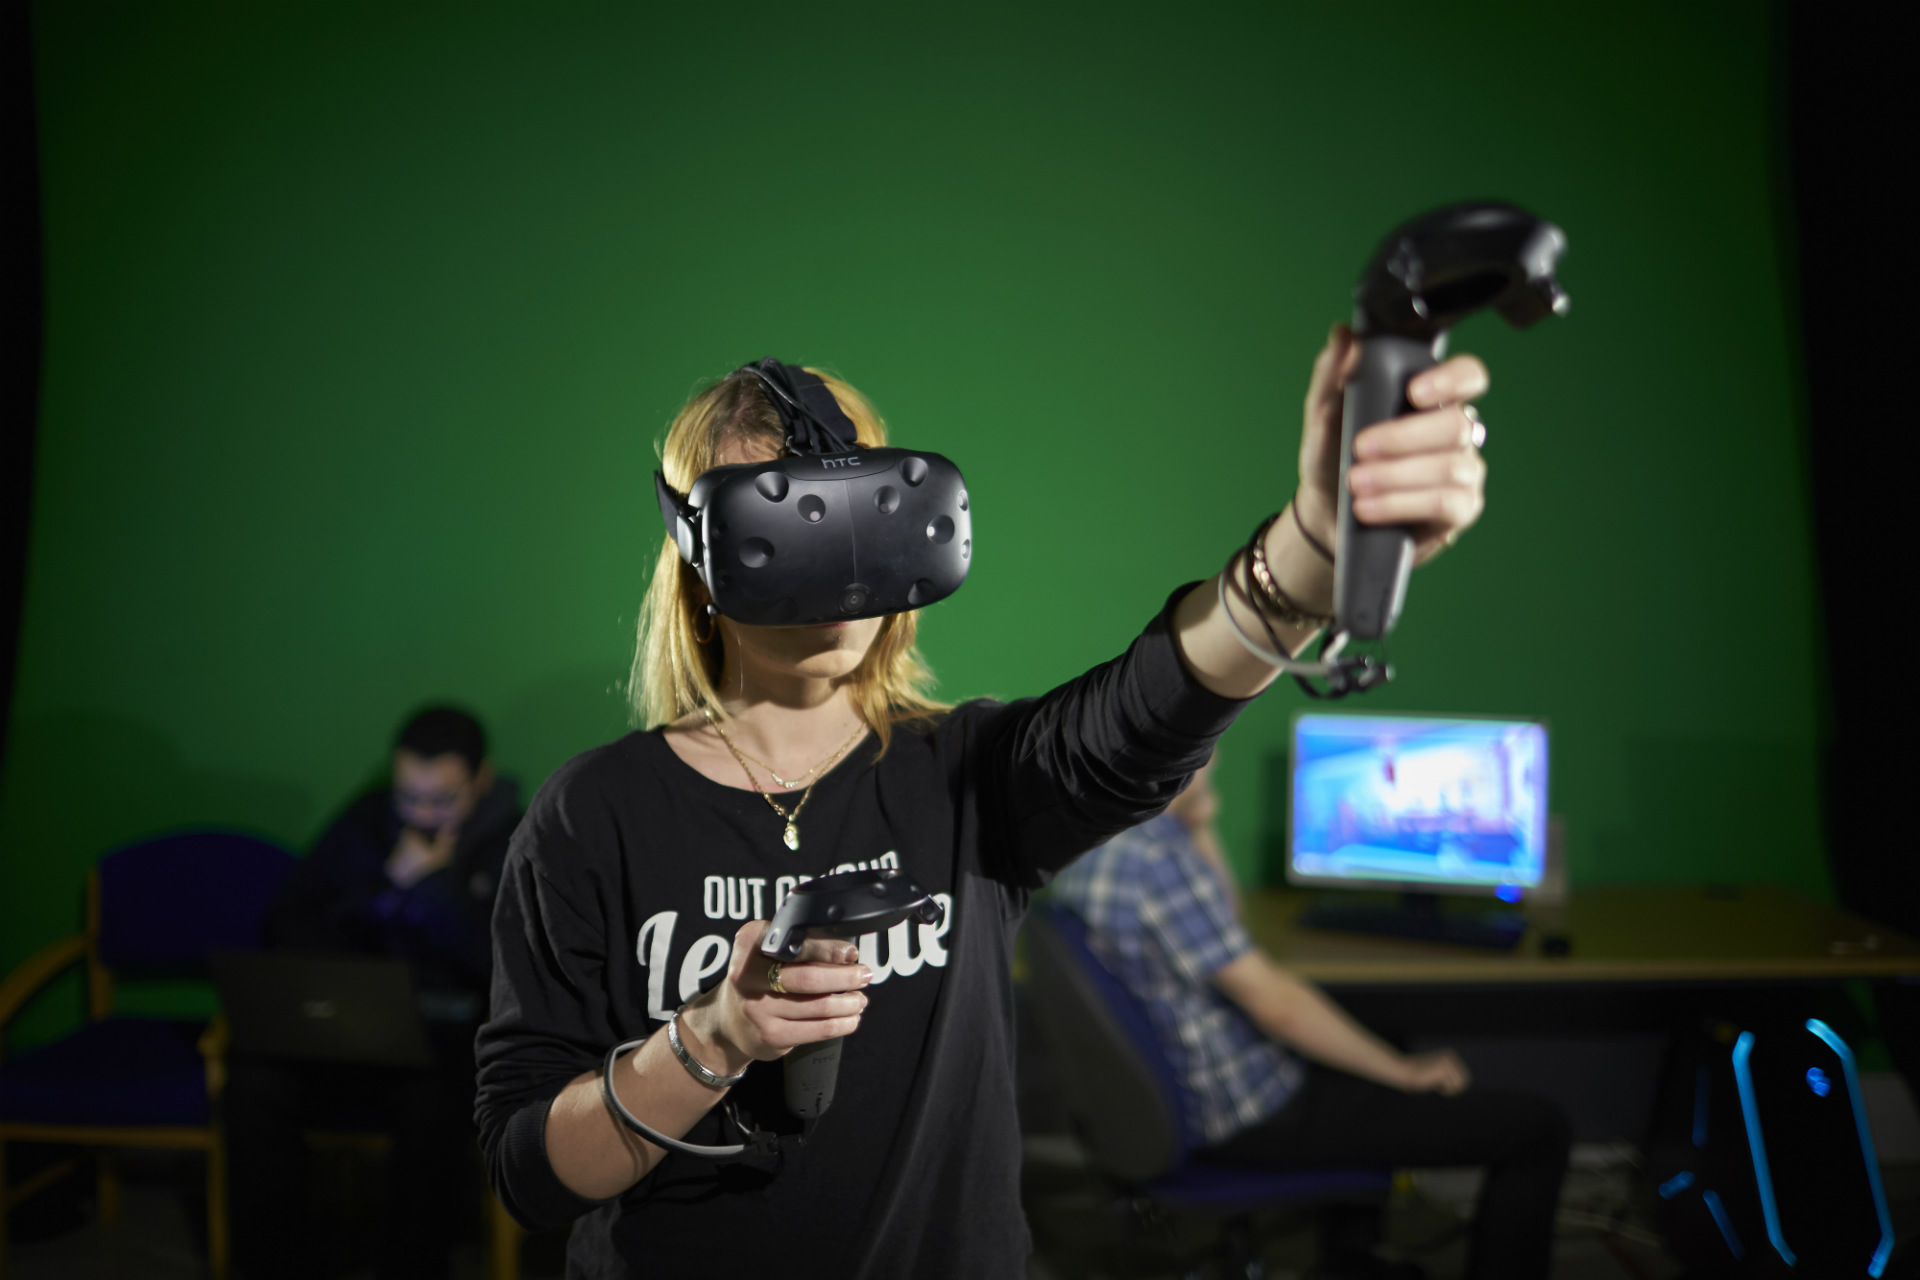 Scottish SMEs working in the games and immersive sector will compete for £35K to develop more inclusive content